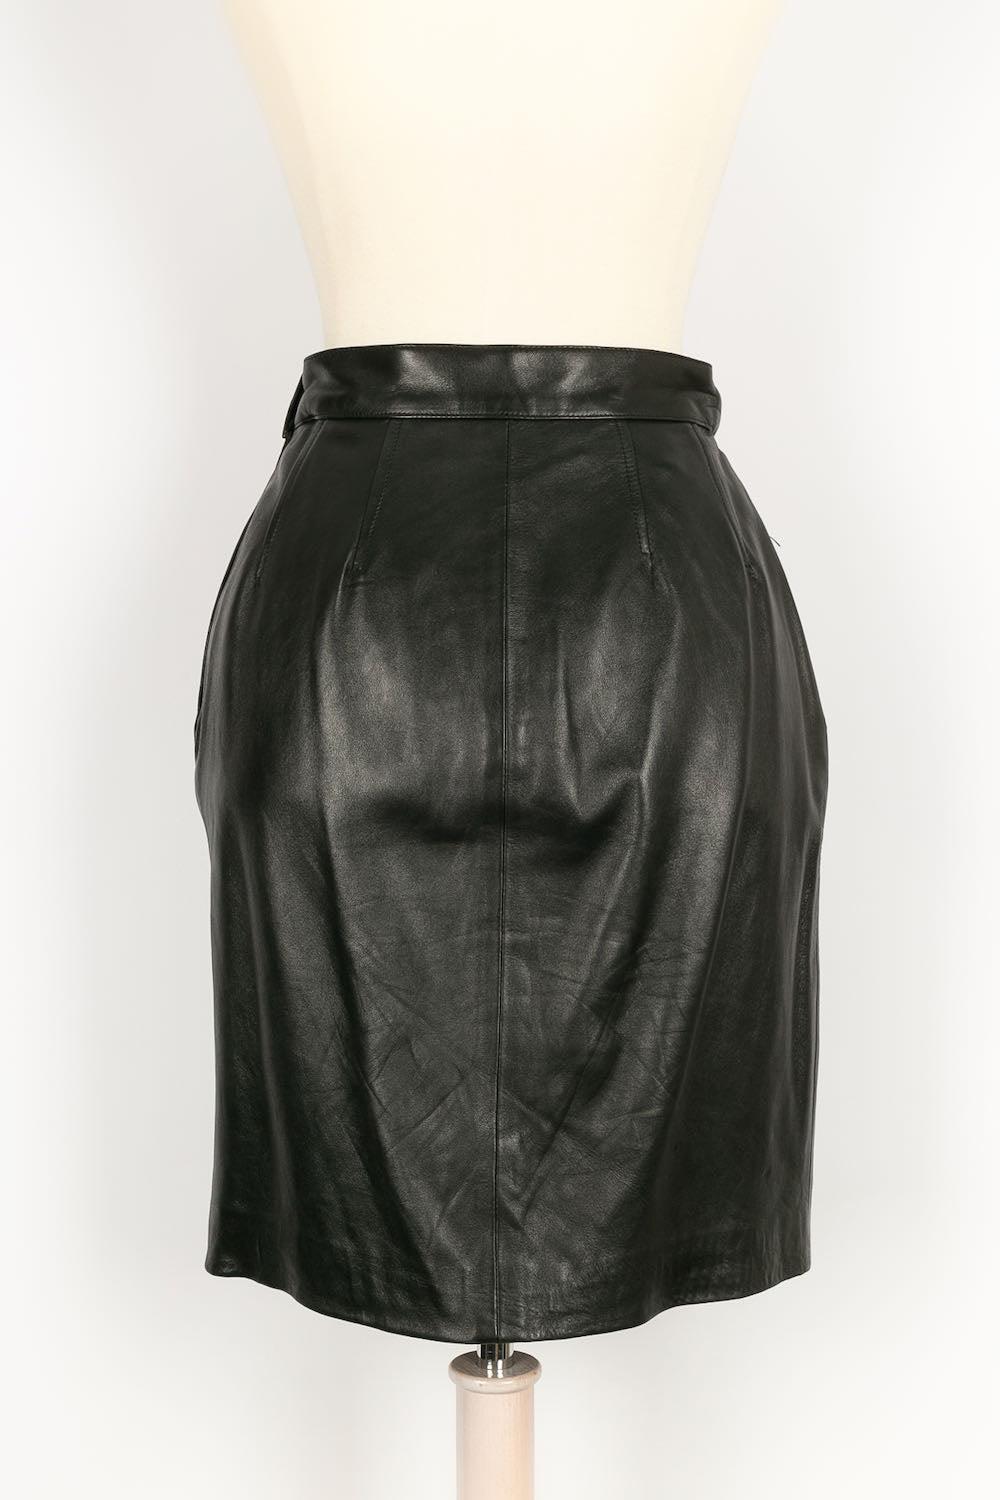 Women's Yves Saint Laurent Leather Suit with Tassels, 1990 For Sale